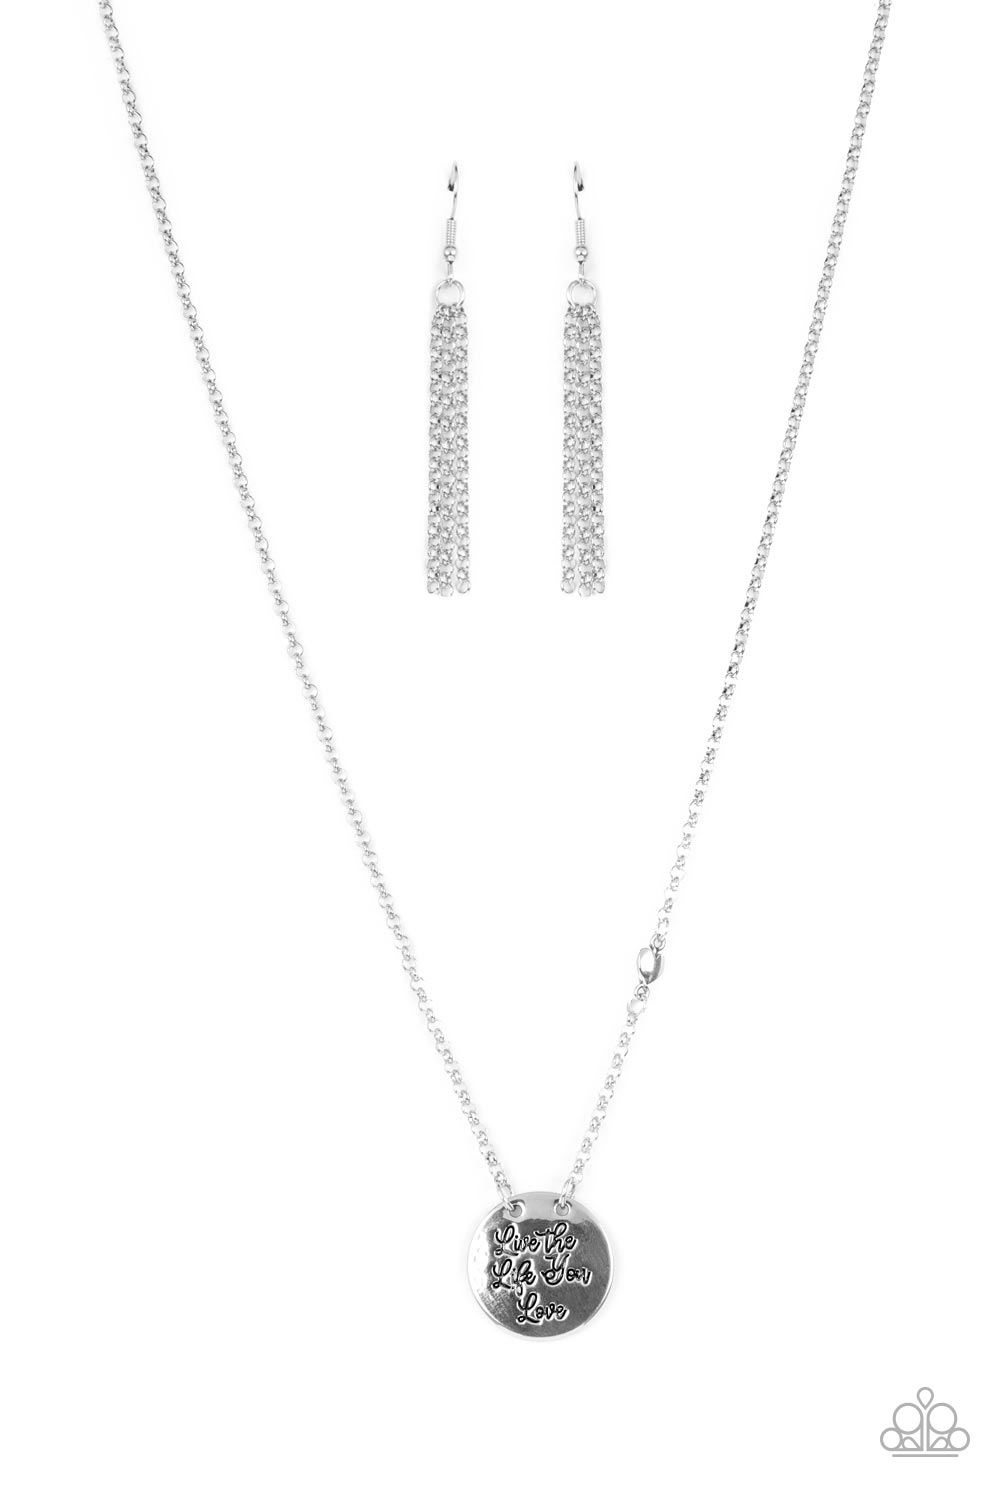 Live The Life You Love Paparazzi Accessories Necklace with Earrings Silver